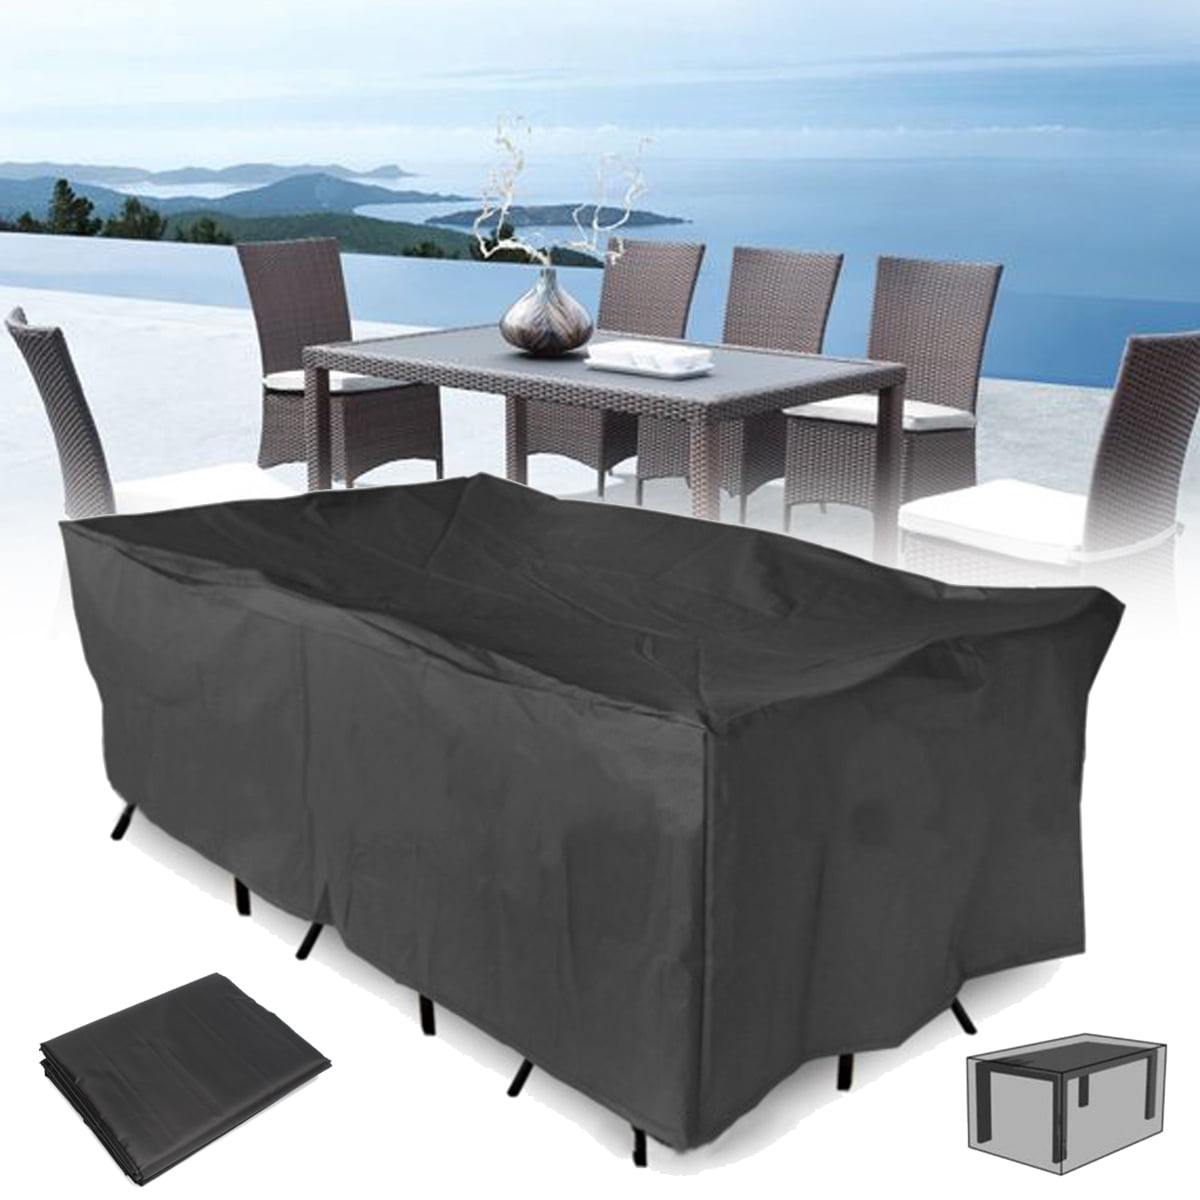 Large Furniture Cover Outdoor Garden, Large Waterproof Covers For Garden Furniture